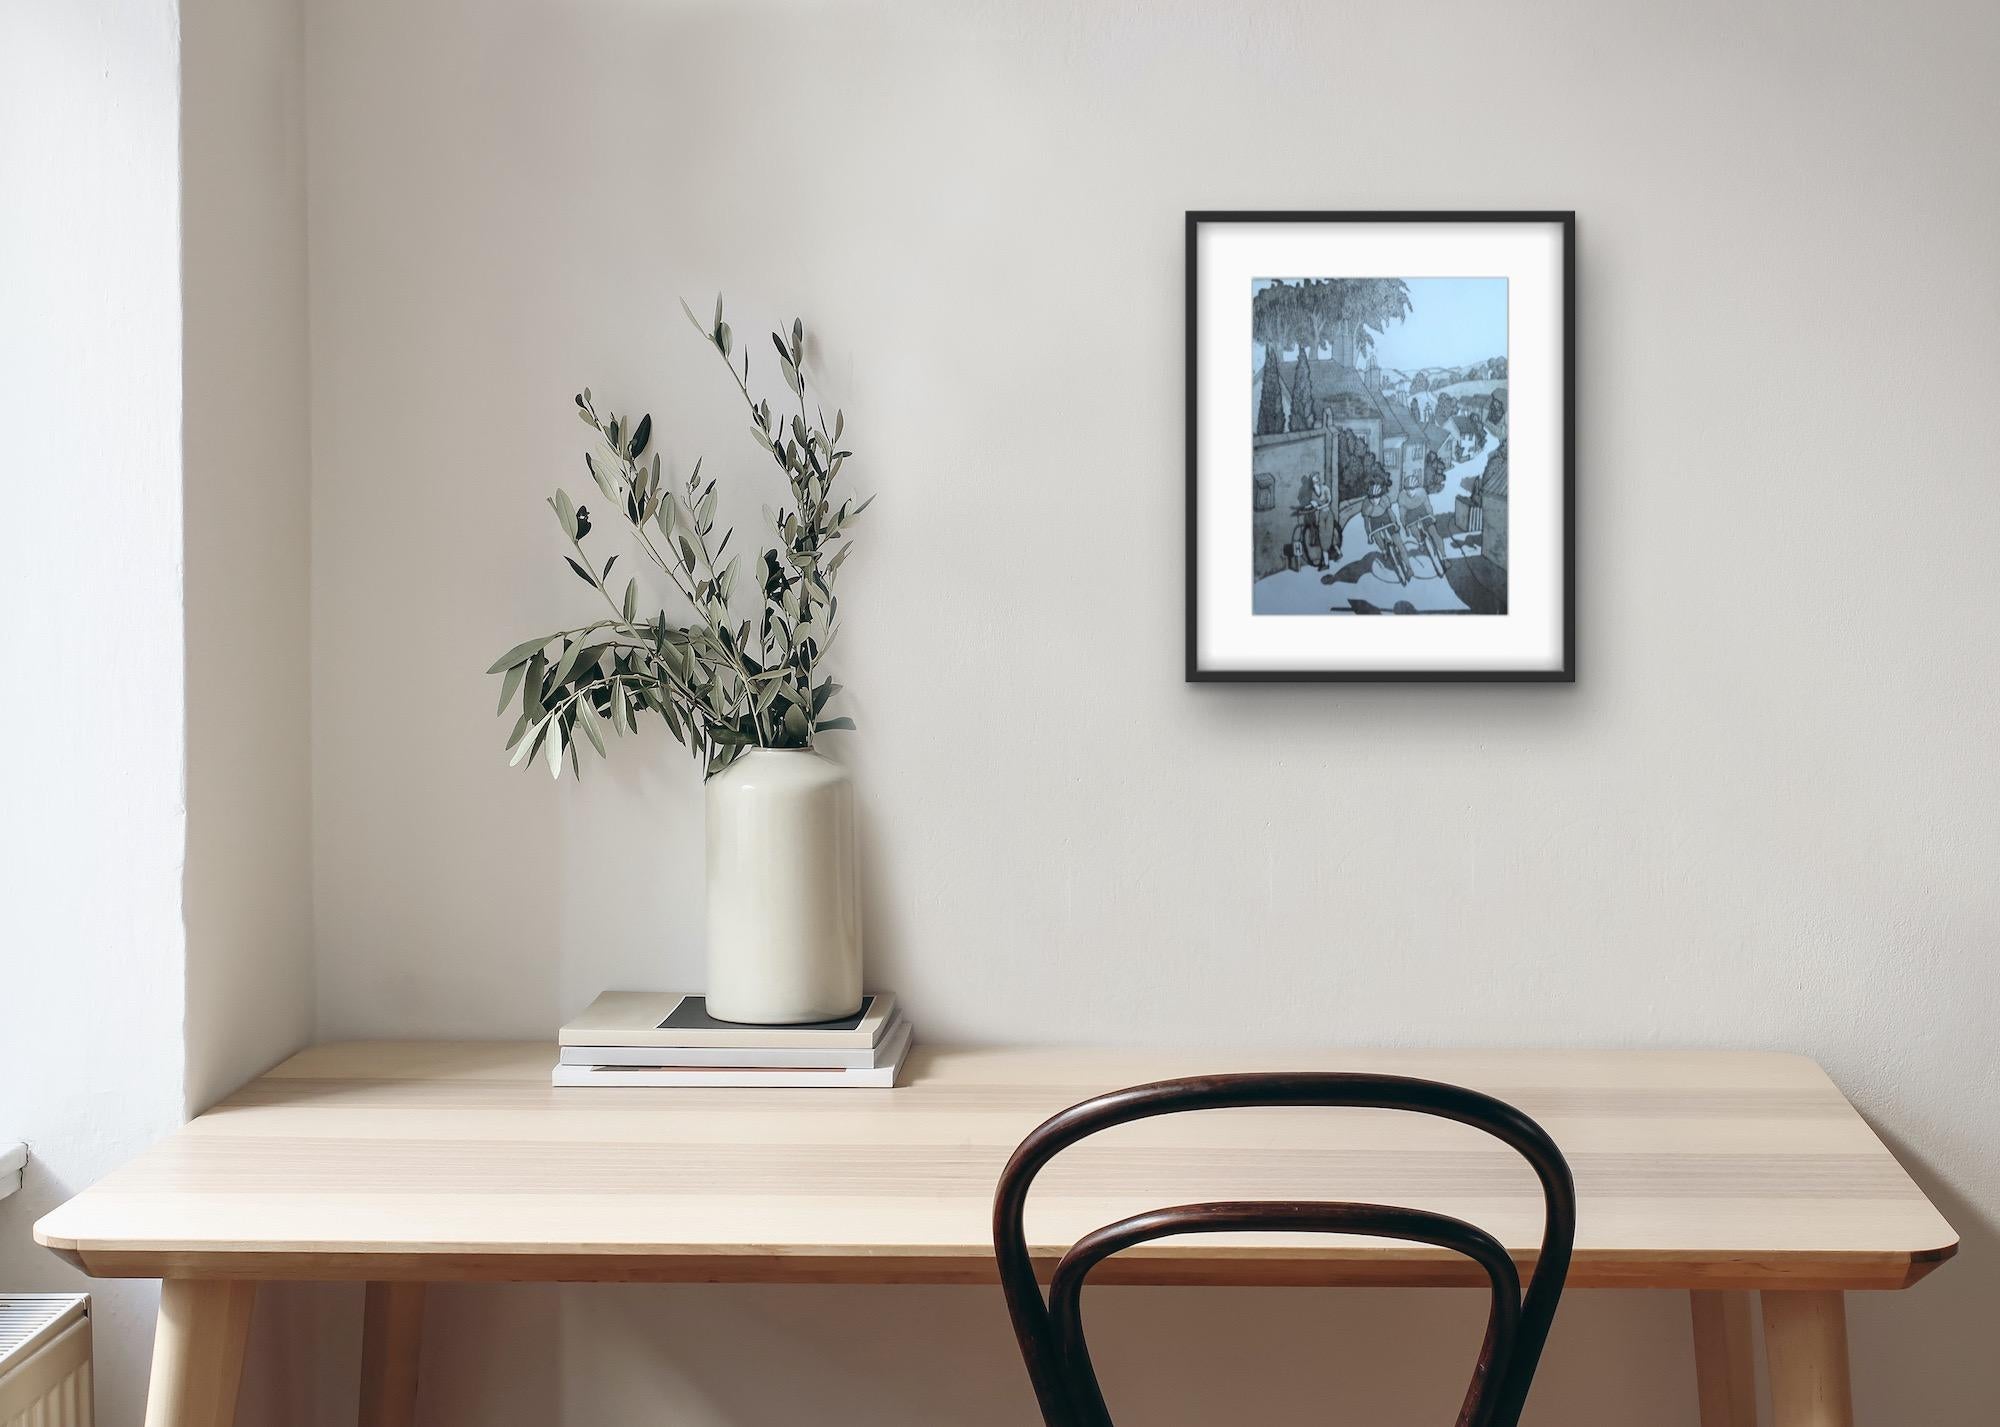 Miss last is startled, limited edition print, still-life, affordable, landscape  - Painting by Michael Atkin